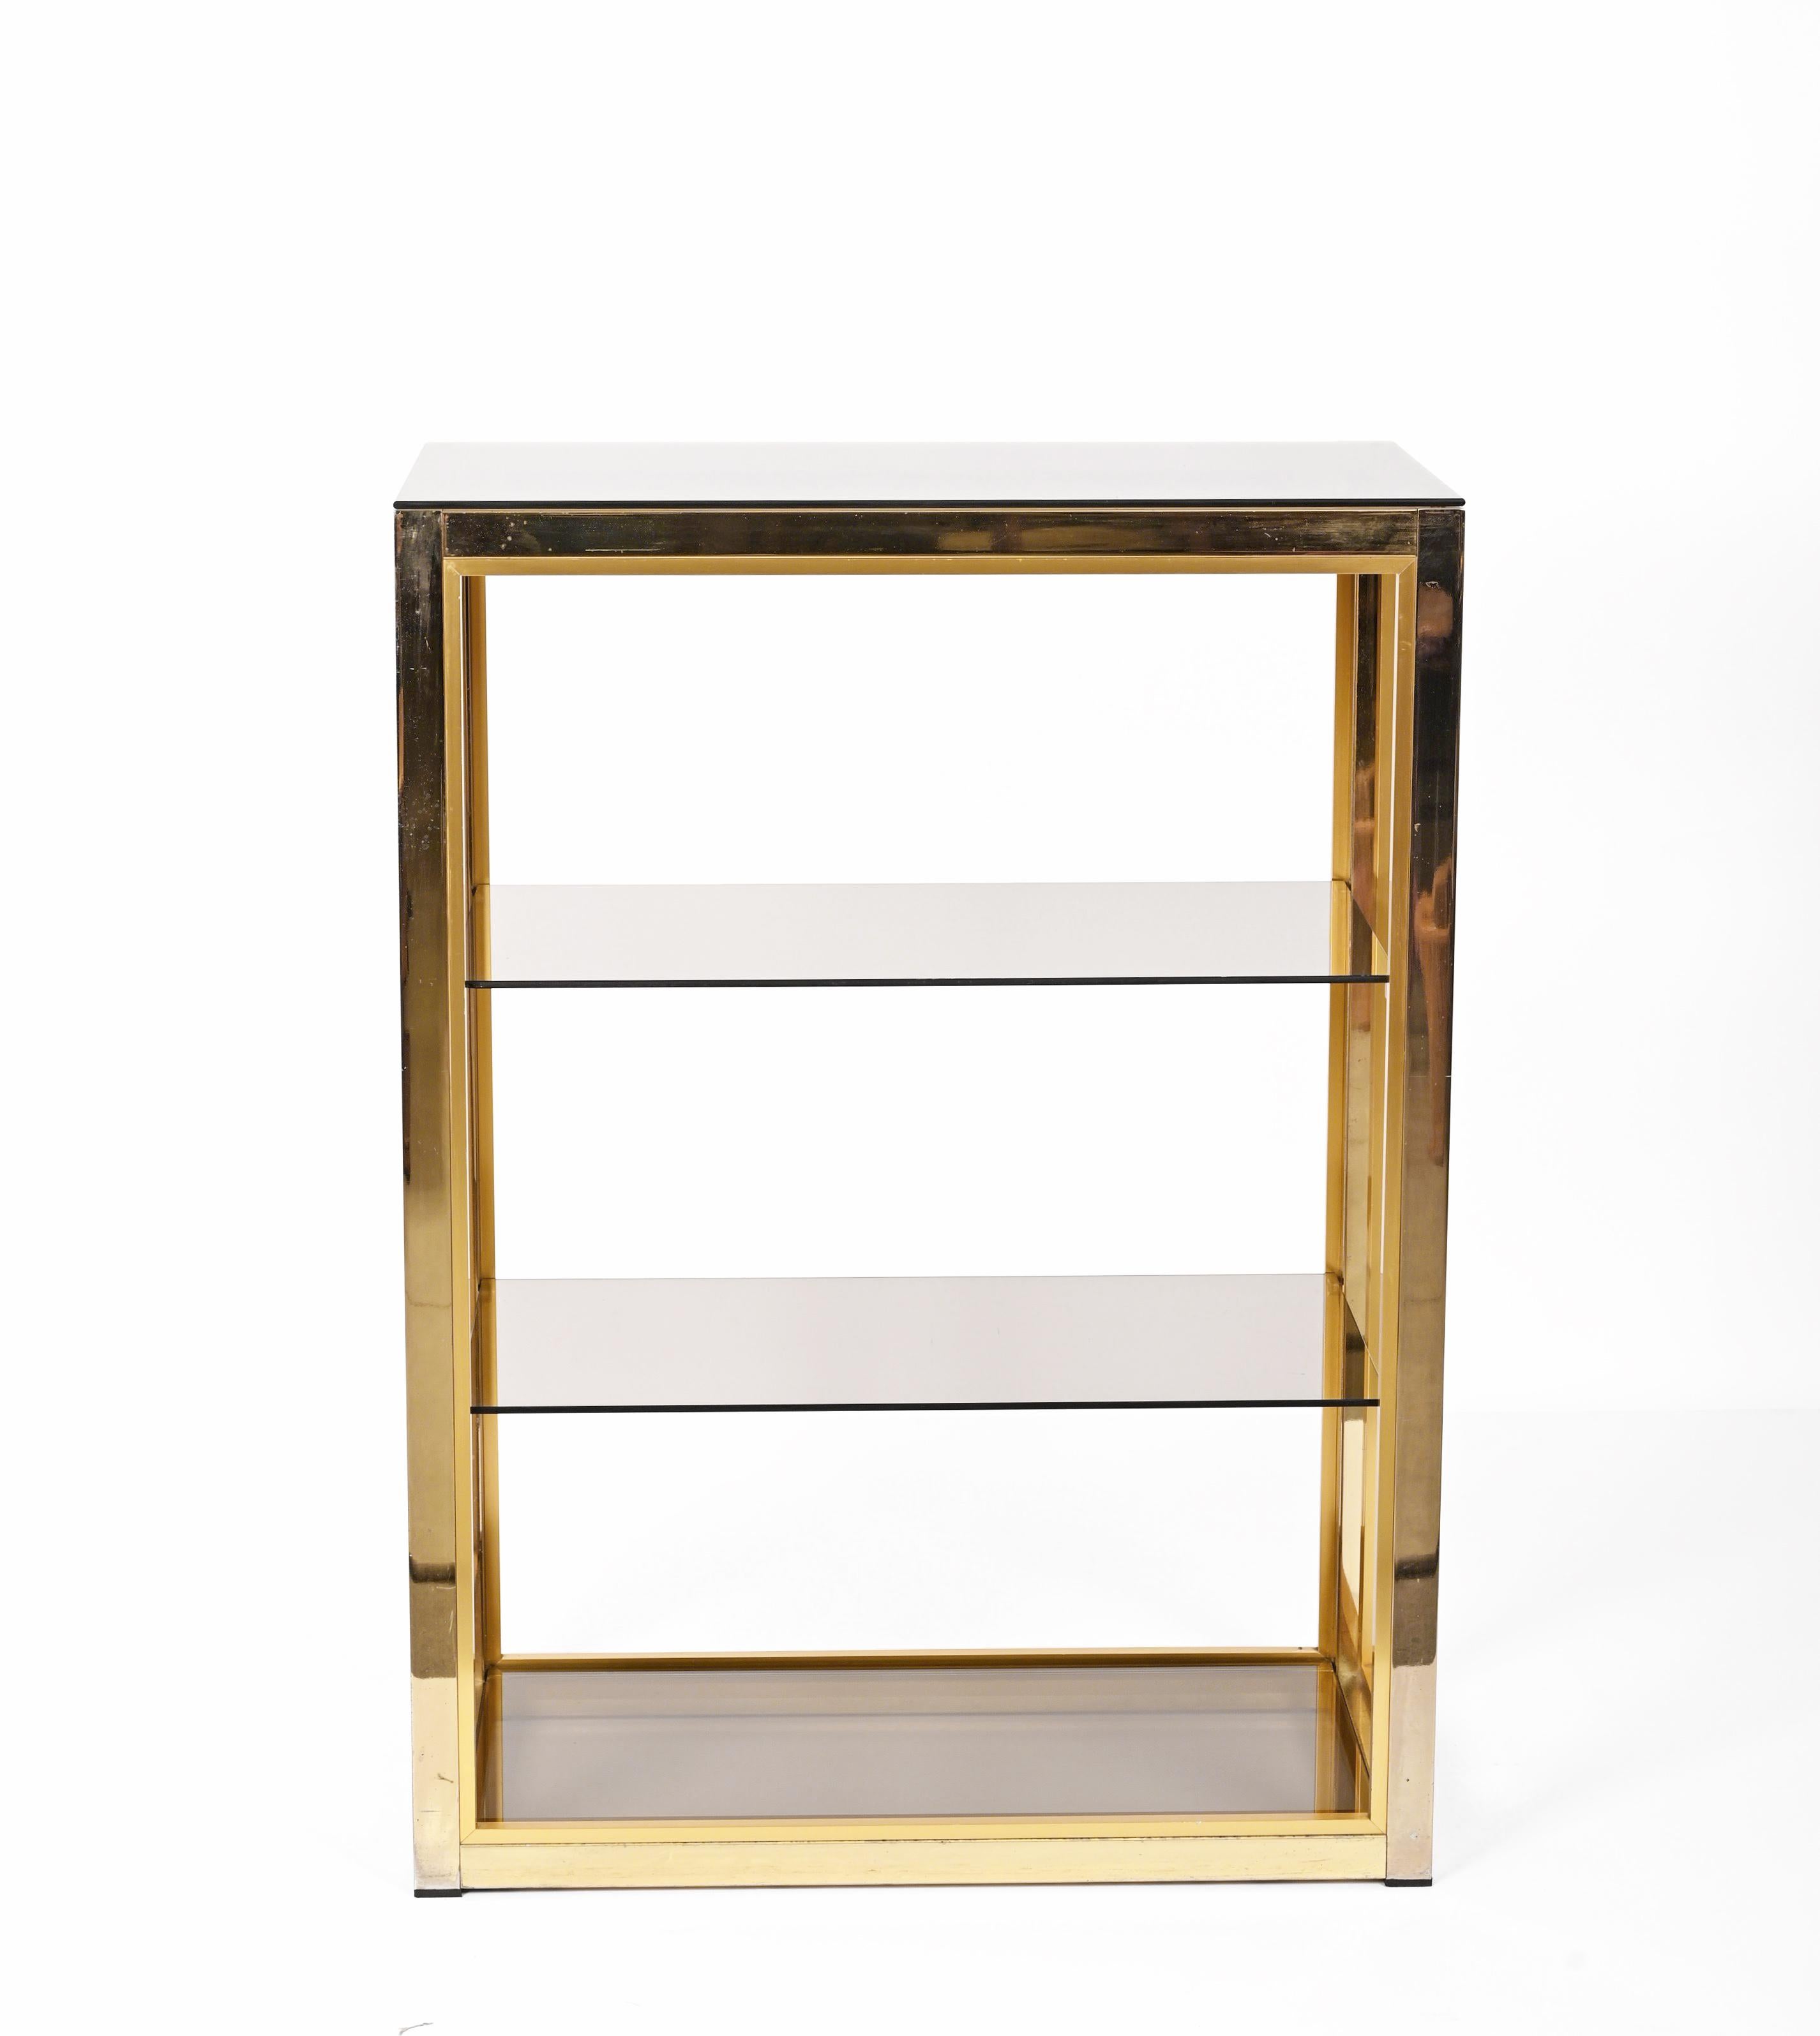 Incredible Hollywood Regency bookcase or etagere in gilt brass with four crystal glass shelves. This fantastic piece was designed and signed by Renato Zevi during ??the 1970s in Italy.

The exceptional materials will surprise you: the pure crystal